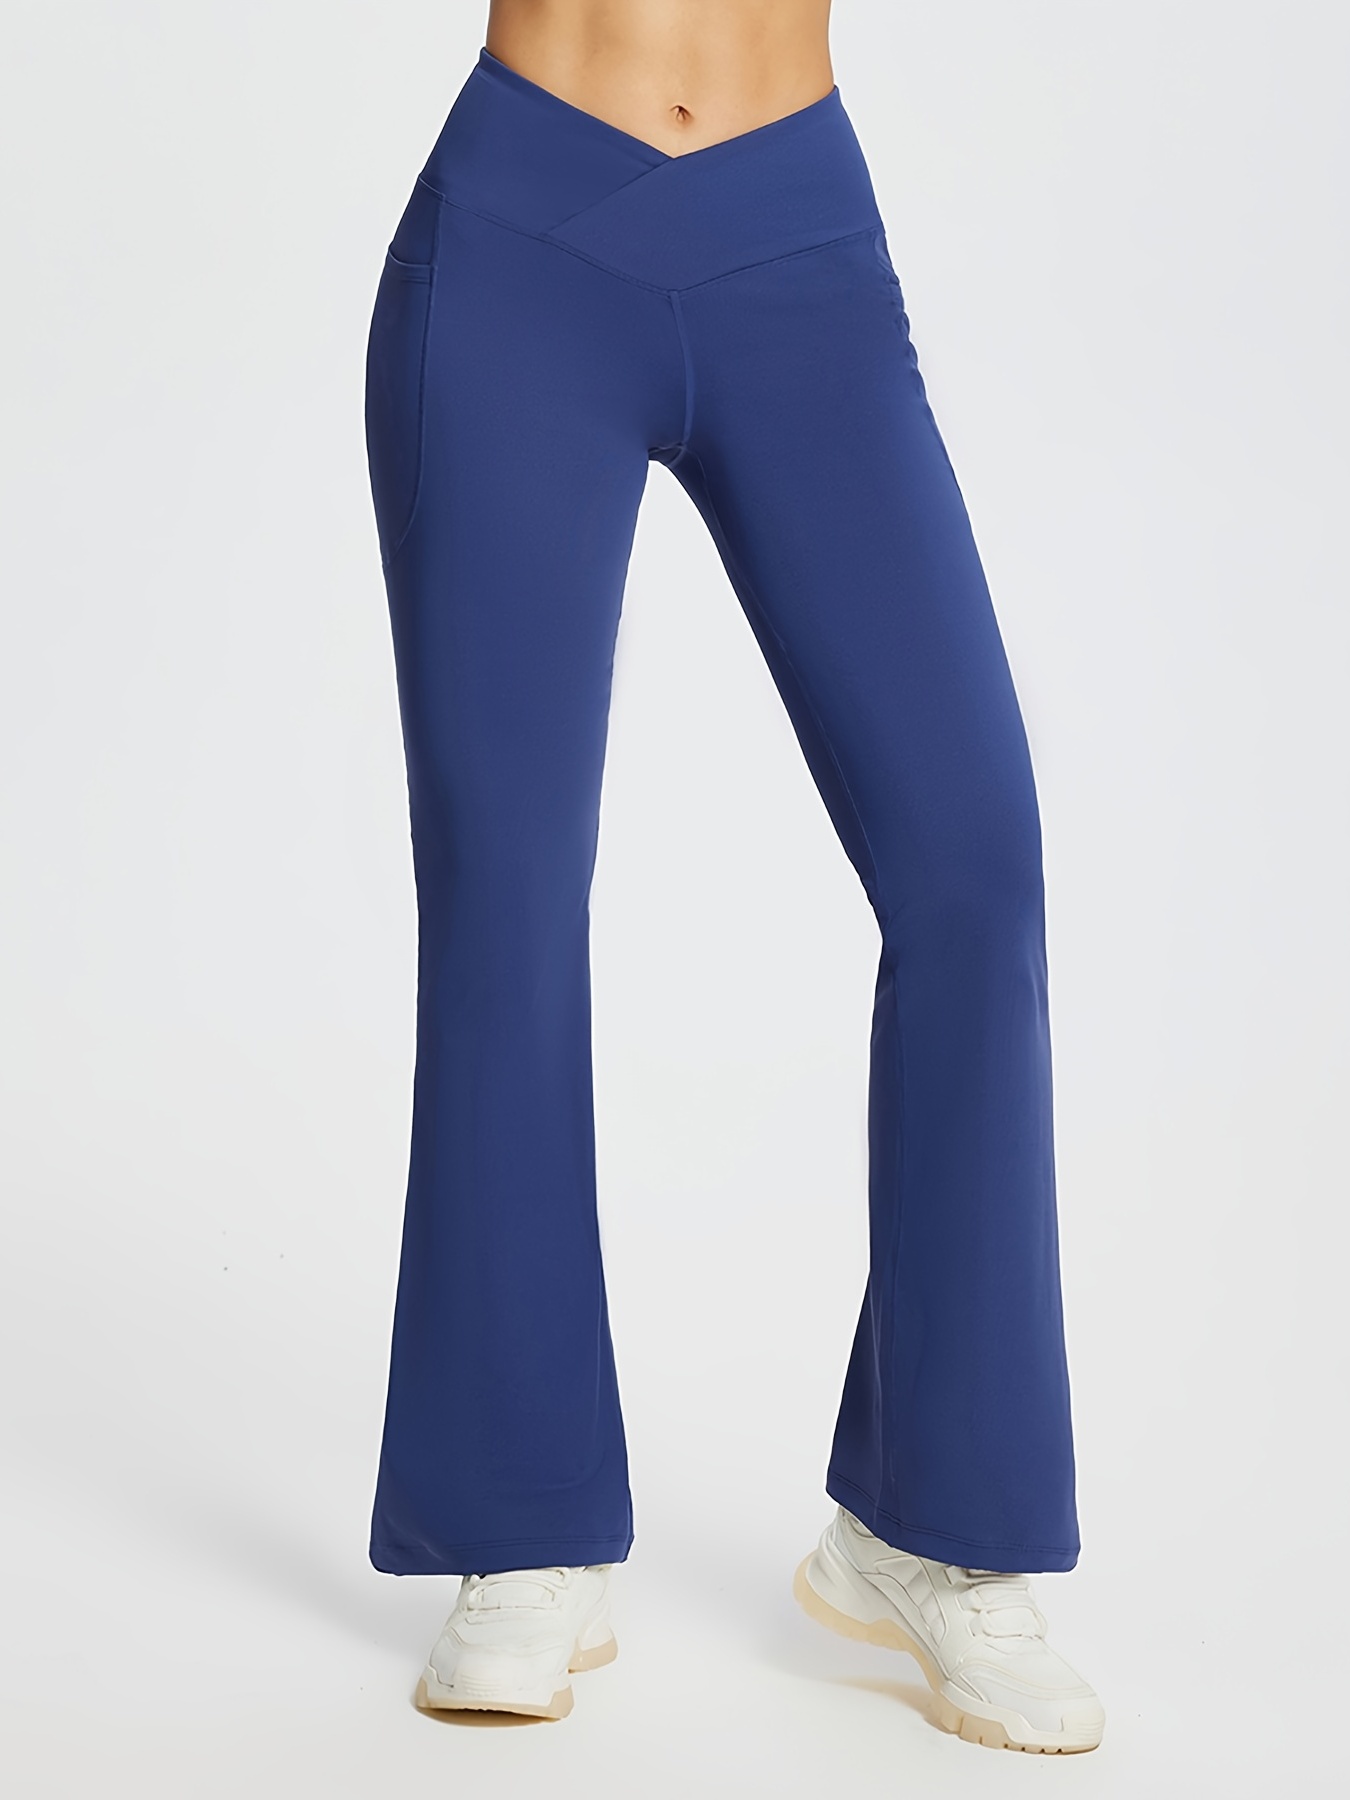 High Waisted Bootcut Yoga Flare Leggings With Side Split And